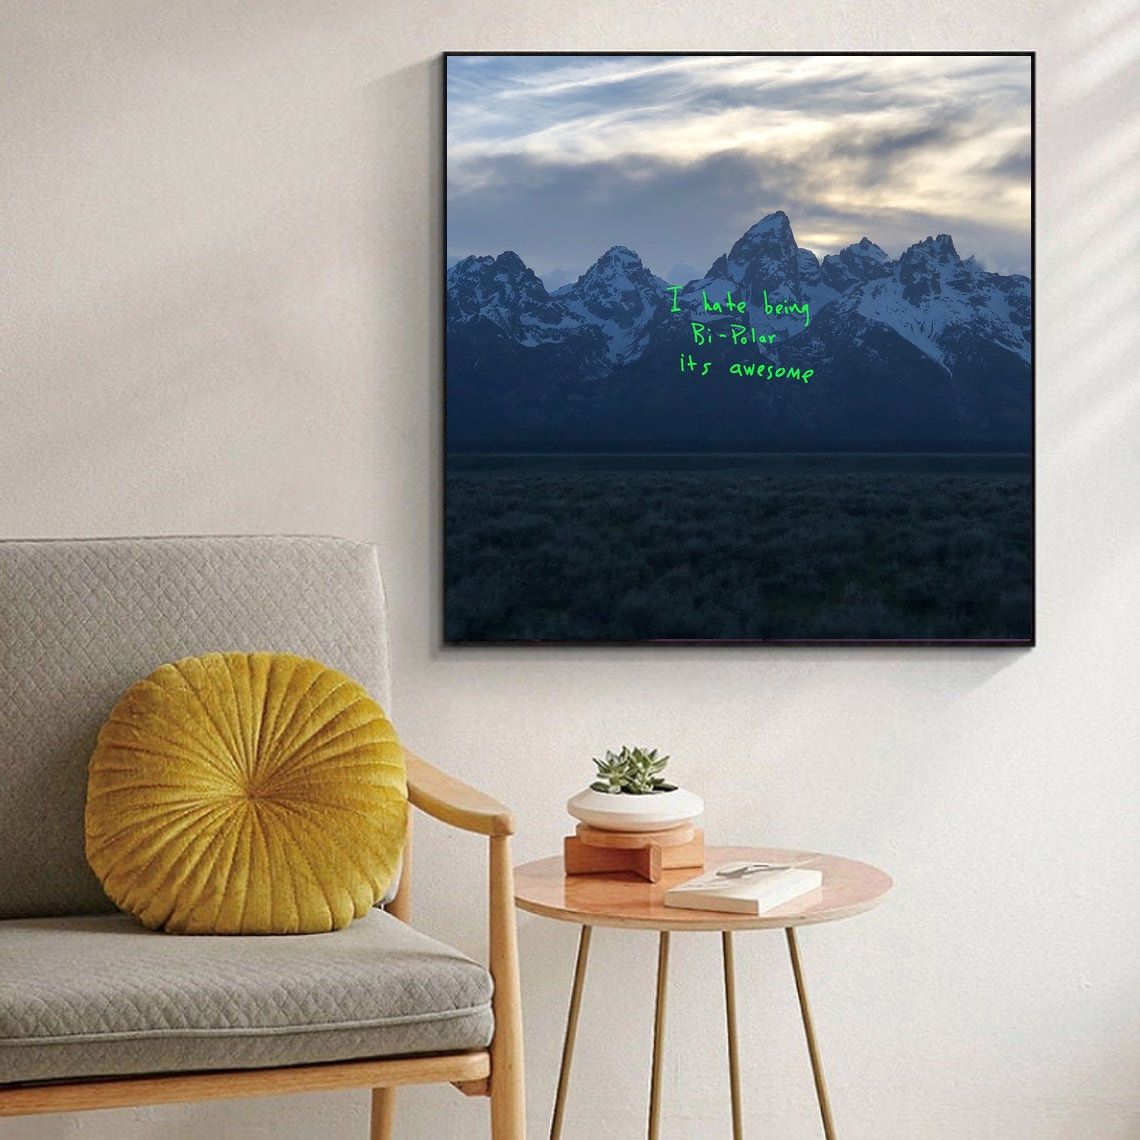 Kanye West Ye Music Album Cover Wall Painting Art Home